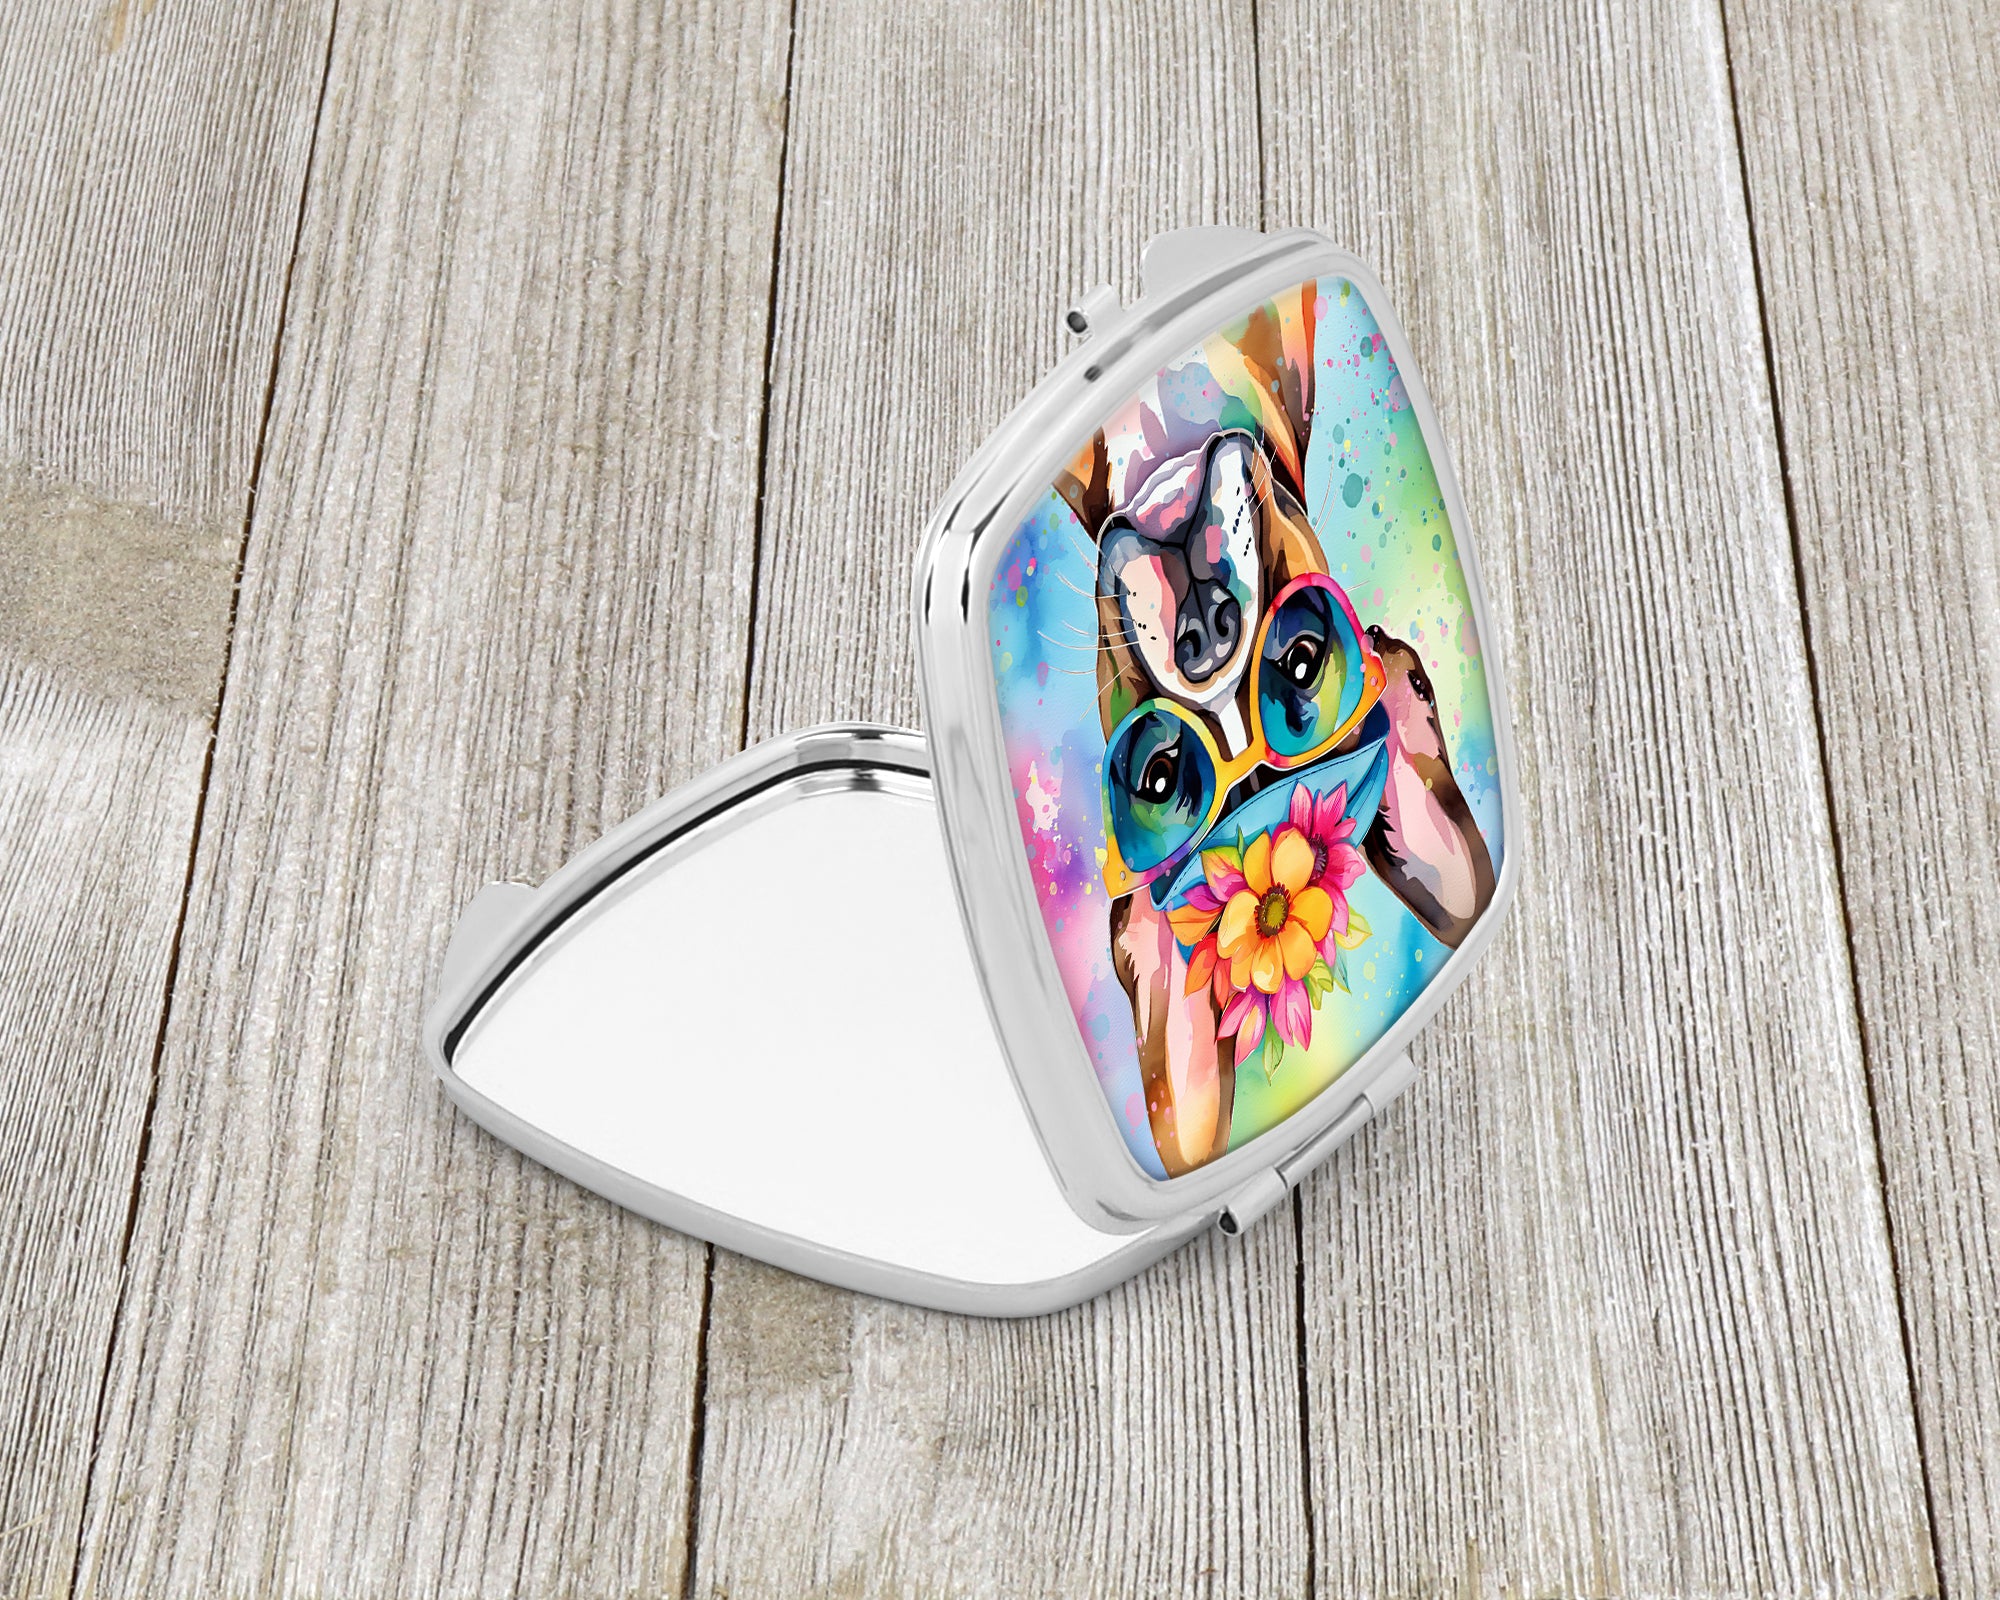 Buy this Boston Terrier Hippie Dawg Compact Mirror